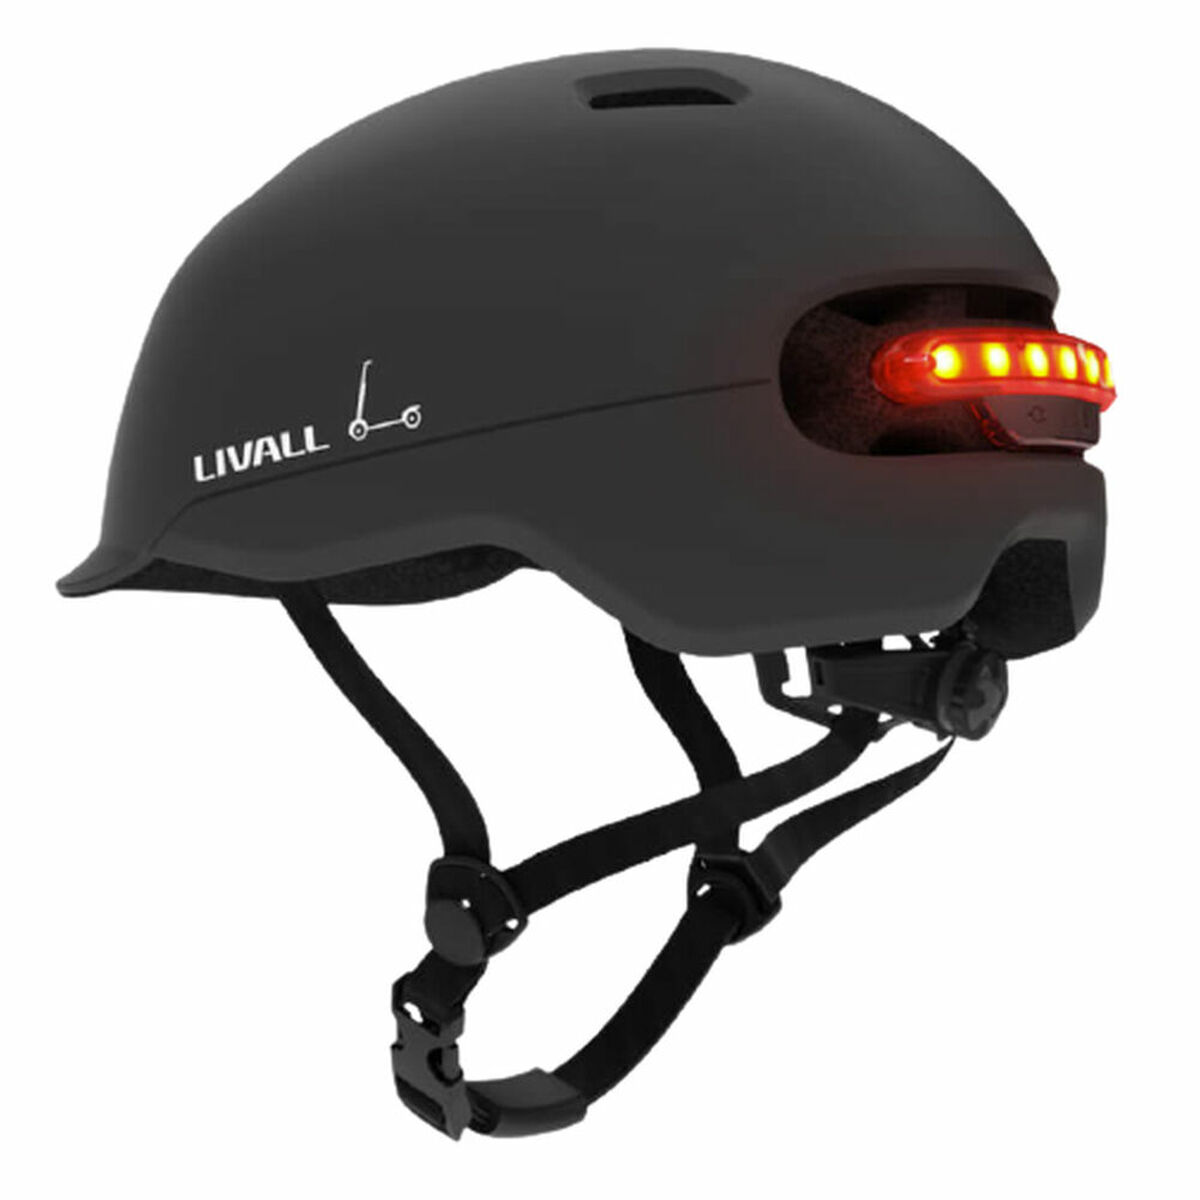 Cover for Electric Scooter Livall C20 Black Size L